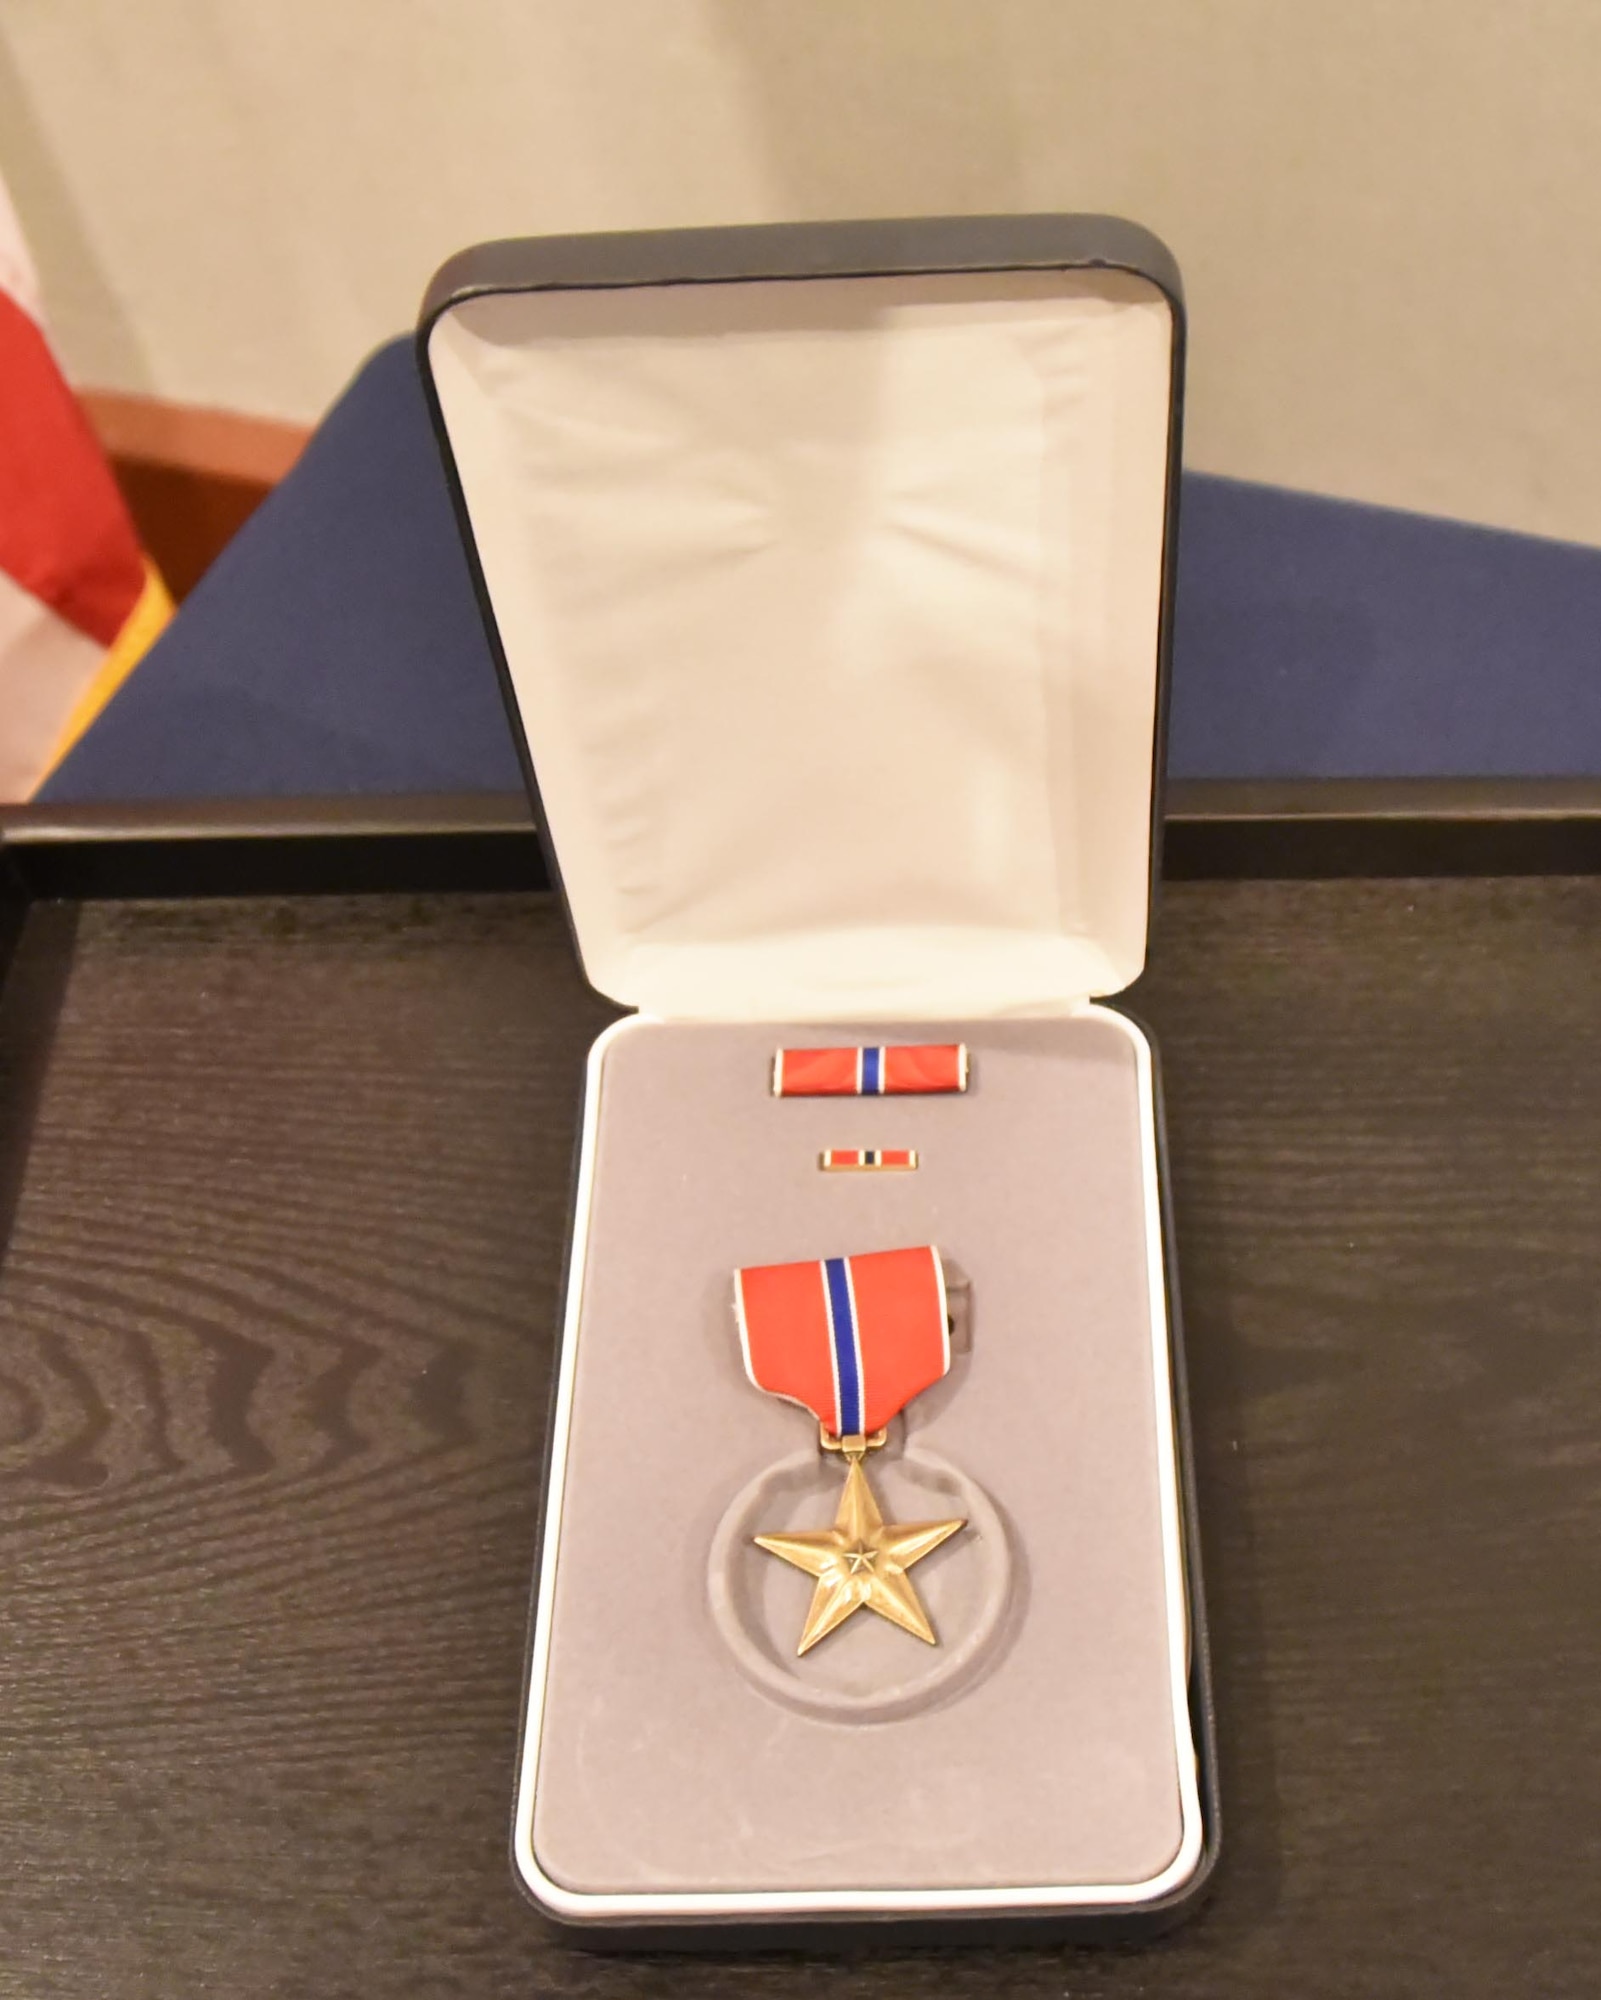 Lt. Col. Johnathan Jordan received the Bronze Star during an official ceremony Feb. 5, 2021, at McConnell Air Force Base, Kansas. Jordan was presented the decoration, the fourth highest military honor, in recognition of his heroic actions after Iran launched 16 missiles at U.S. Forces in Iraq in January 2020. At the time, Jordan was serving as an Air Force director of operations officer Al-Asad Air Base, Iraq, where 11 missiles struck.